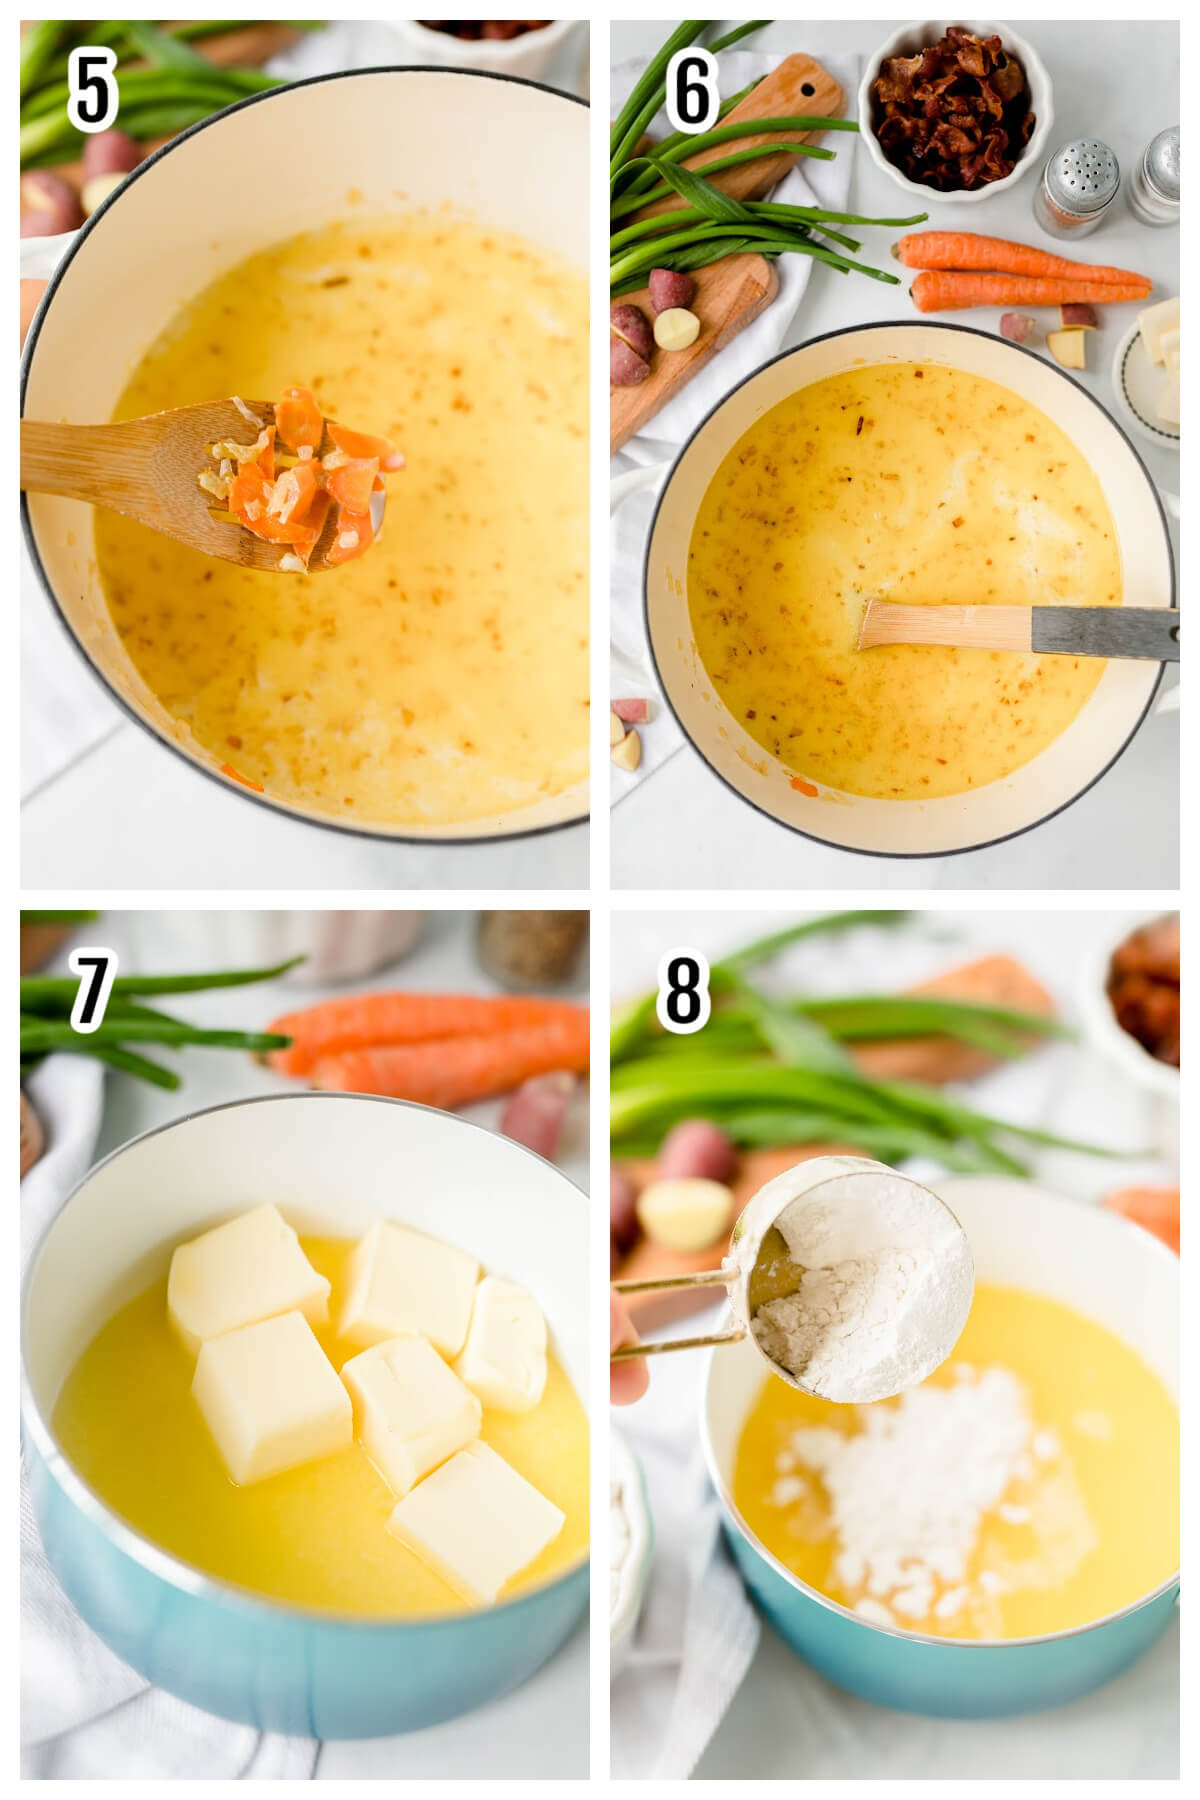 Second set of instructions for making soup with potatoes